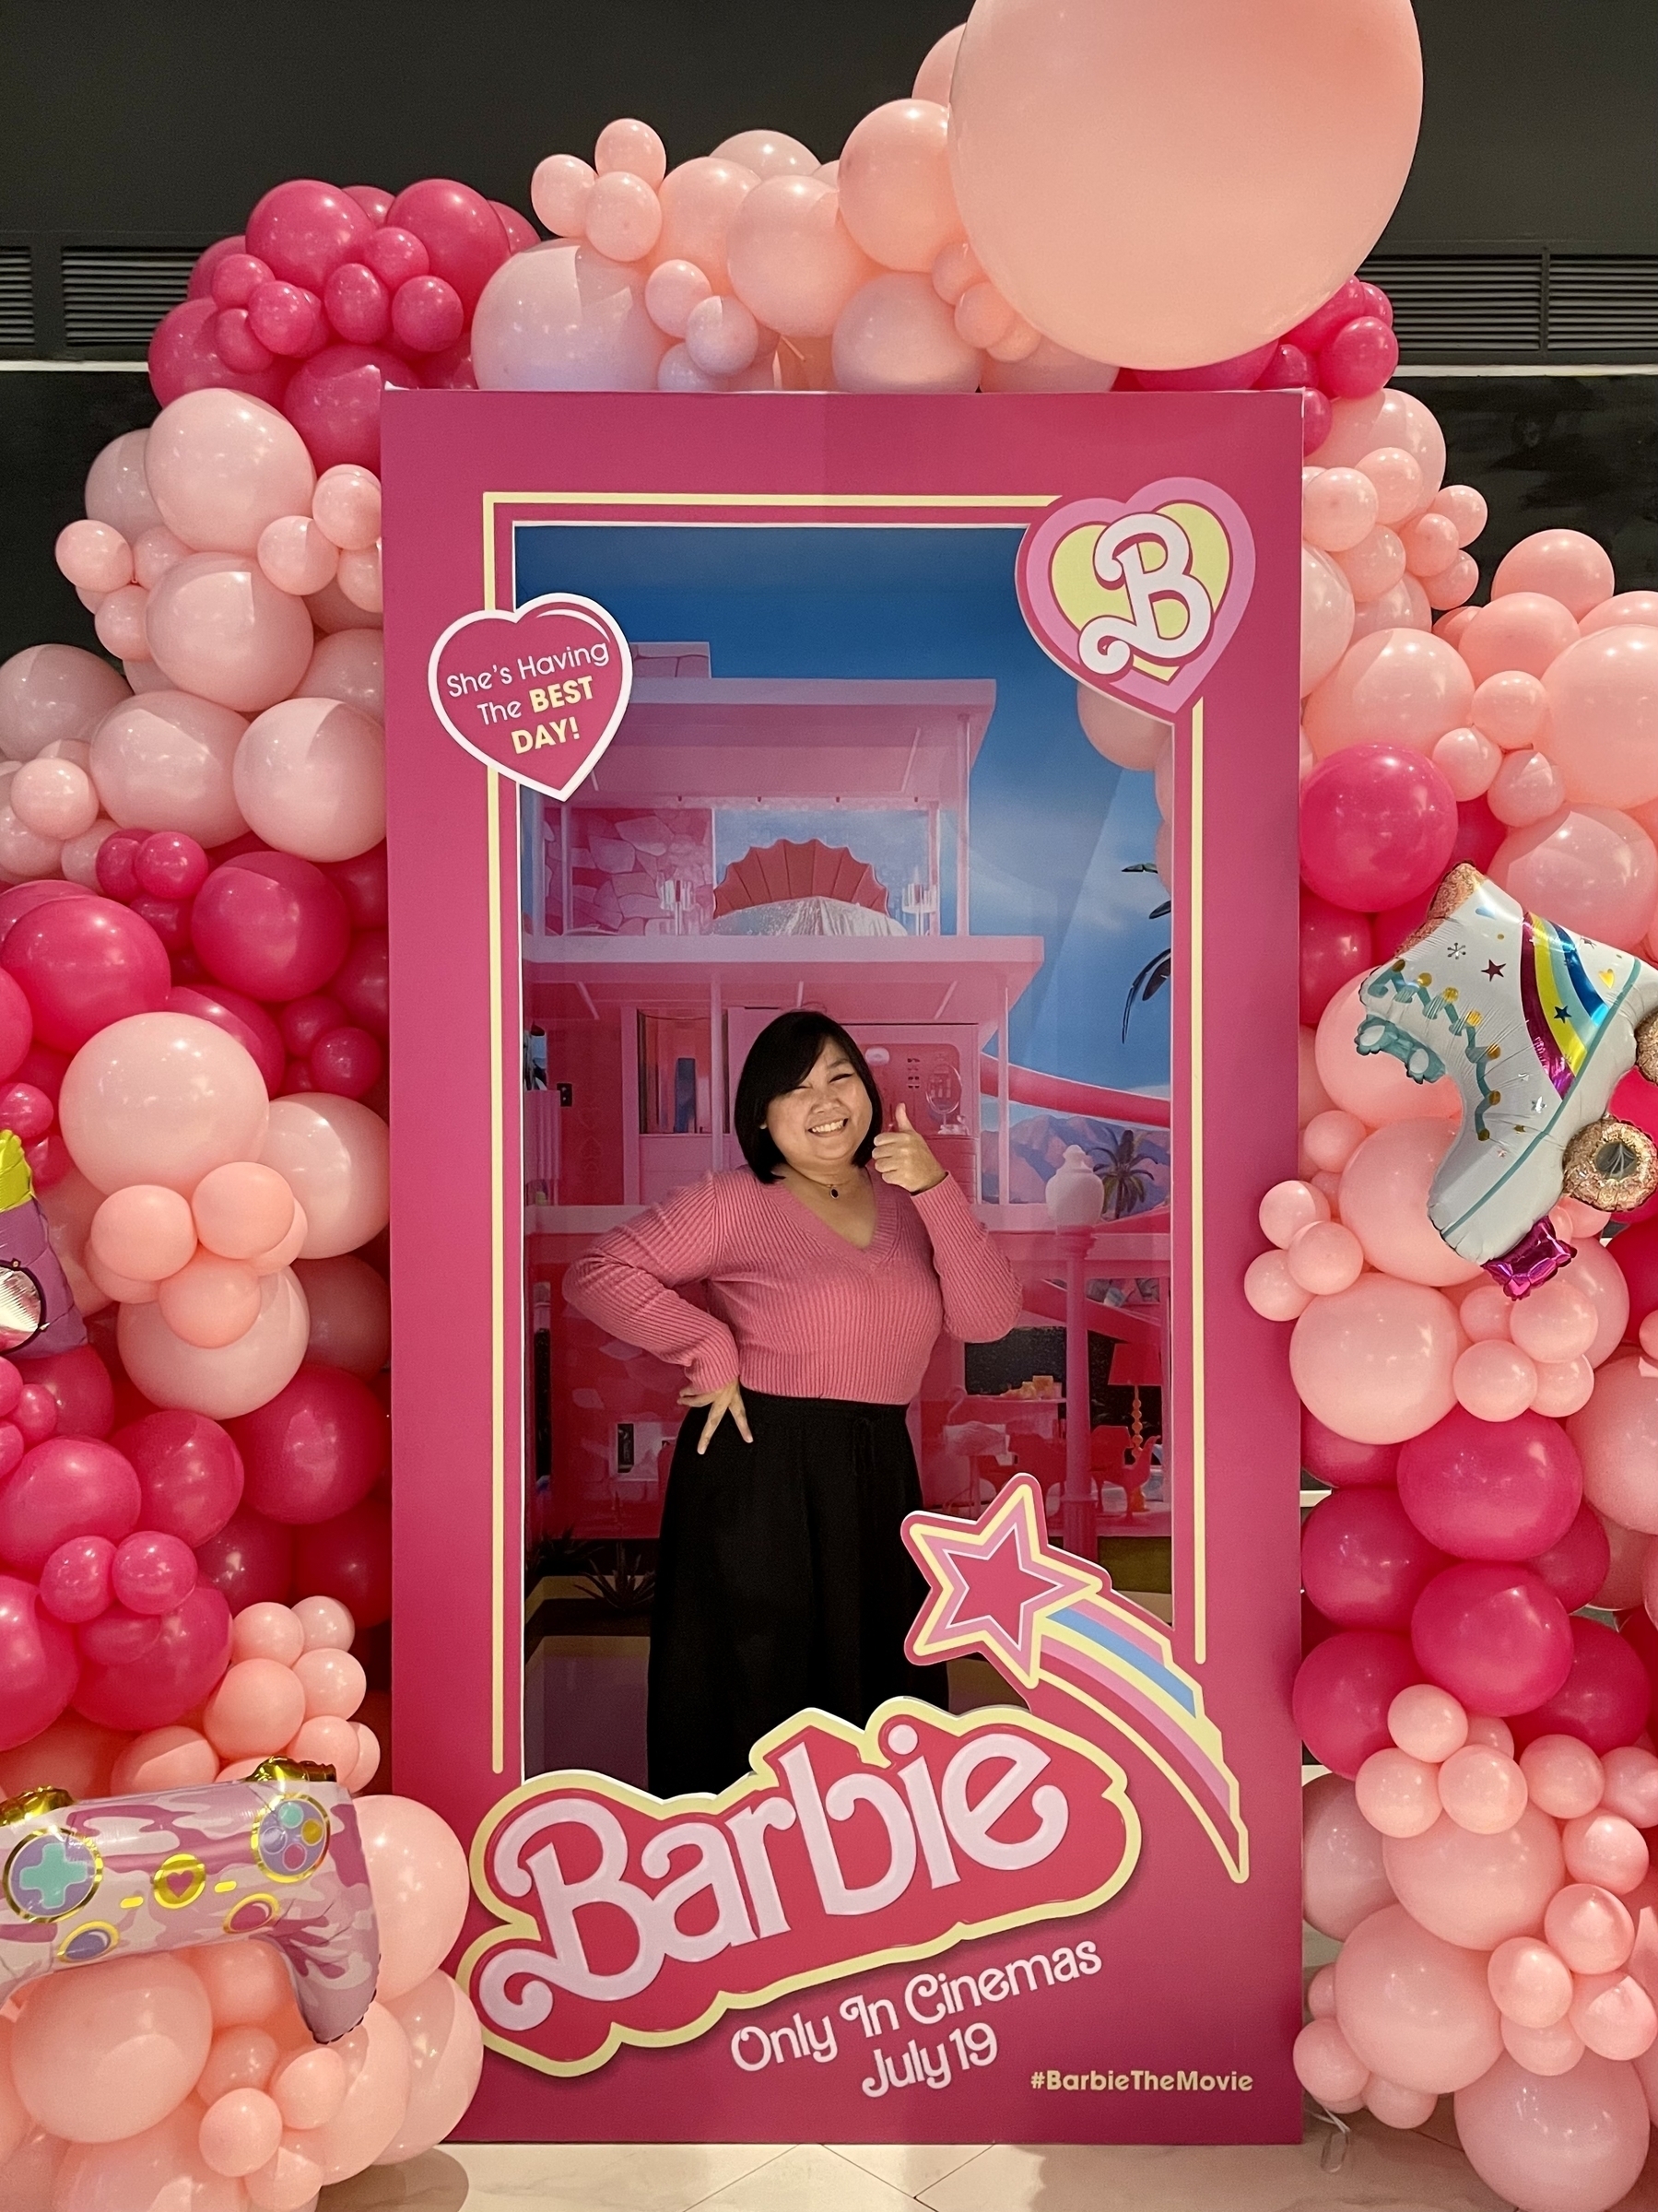 Chi posing in the Barbie Box promotional stand for the movie, dressed in a pink long-sleeved top and a black long skirt.